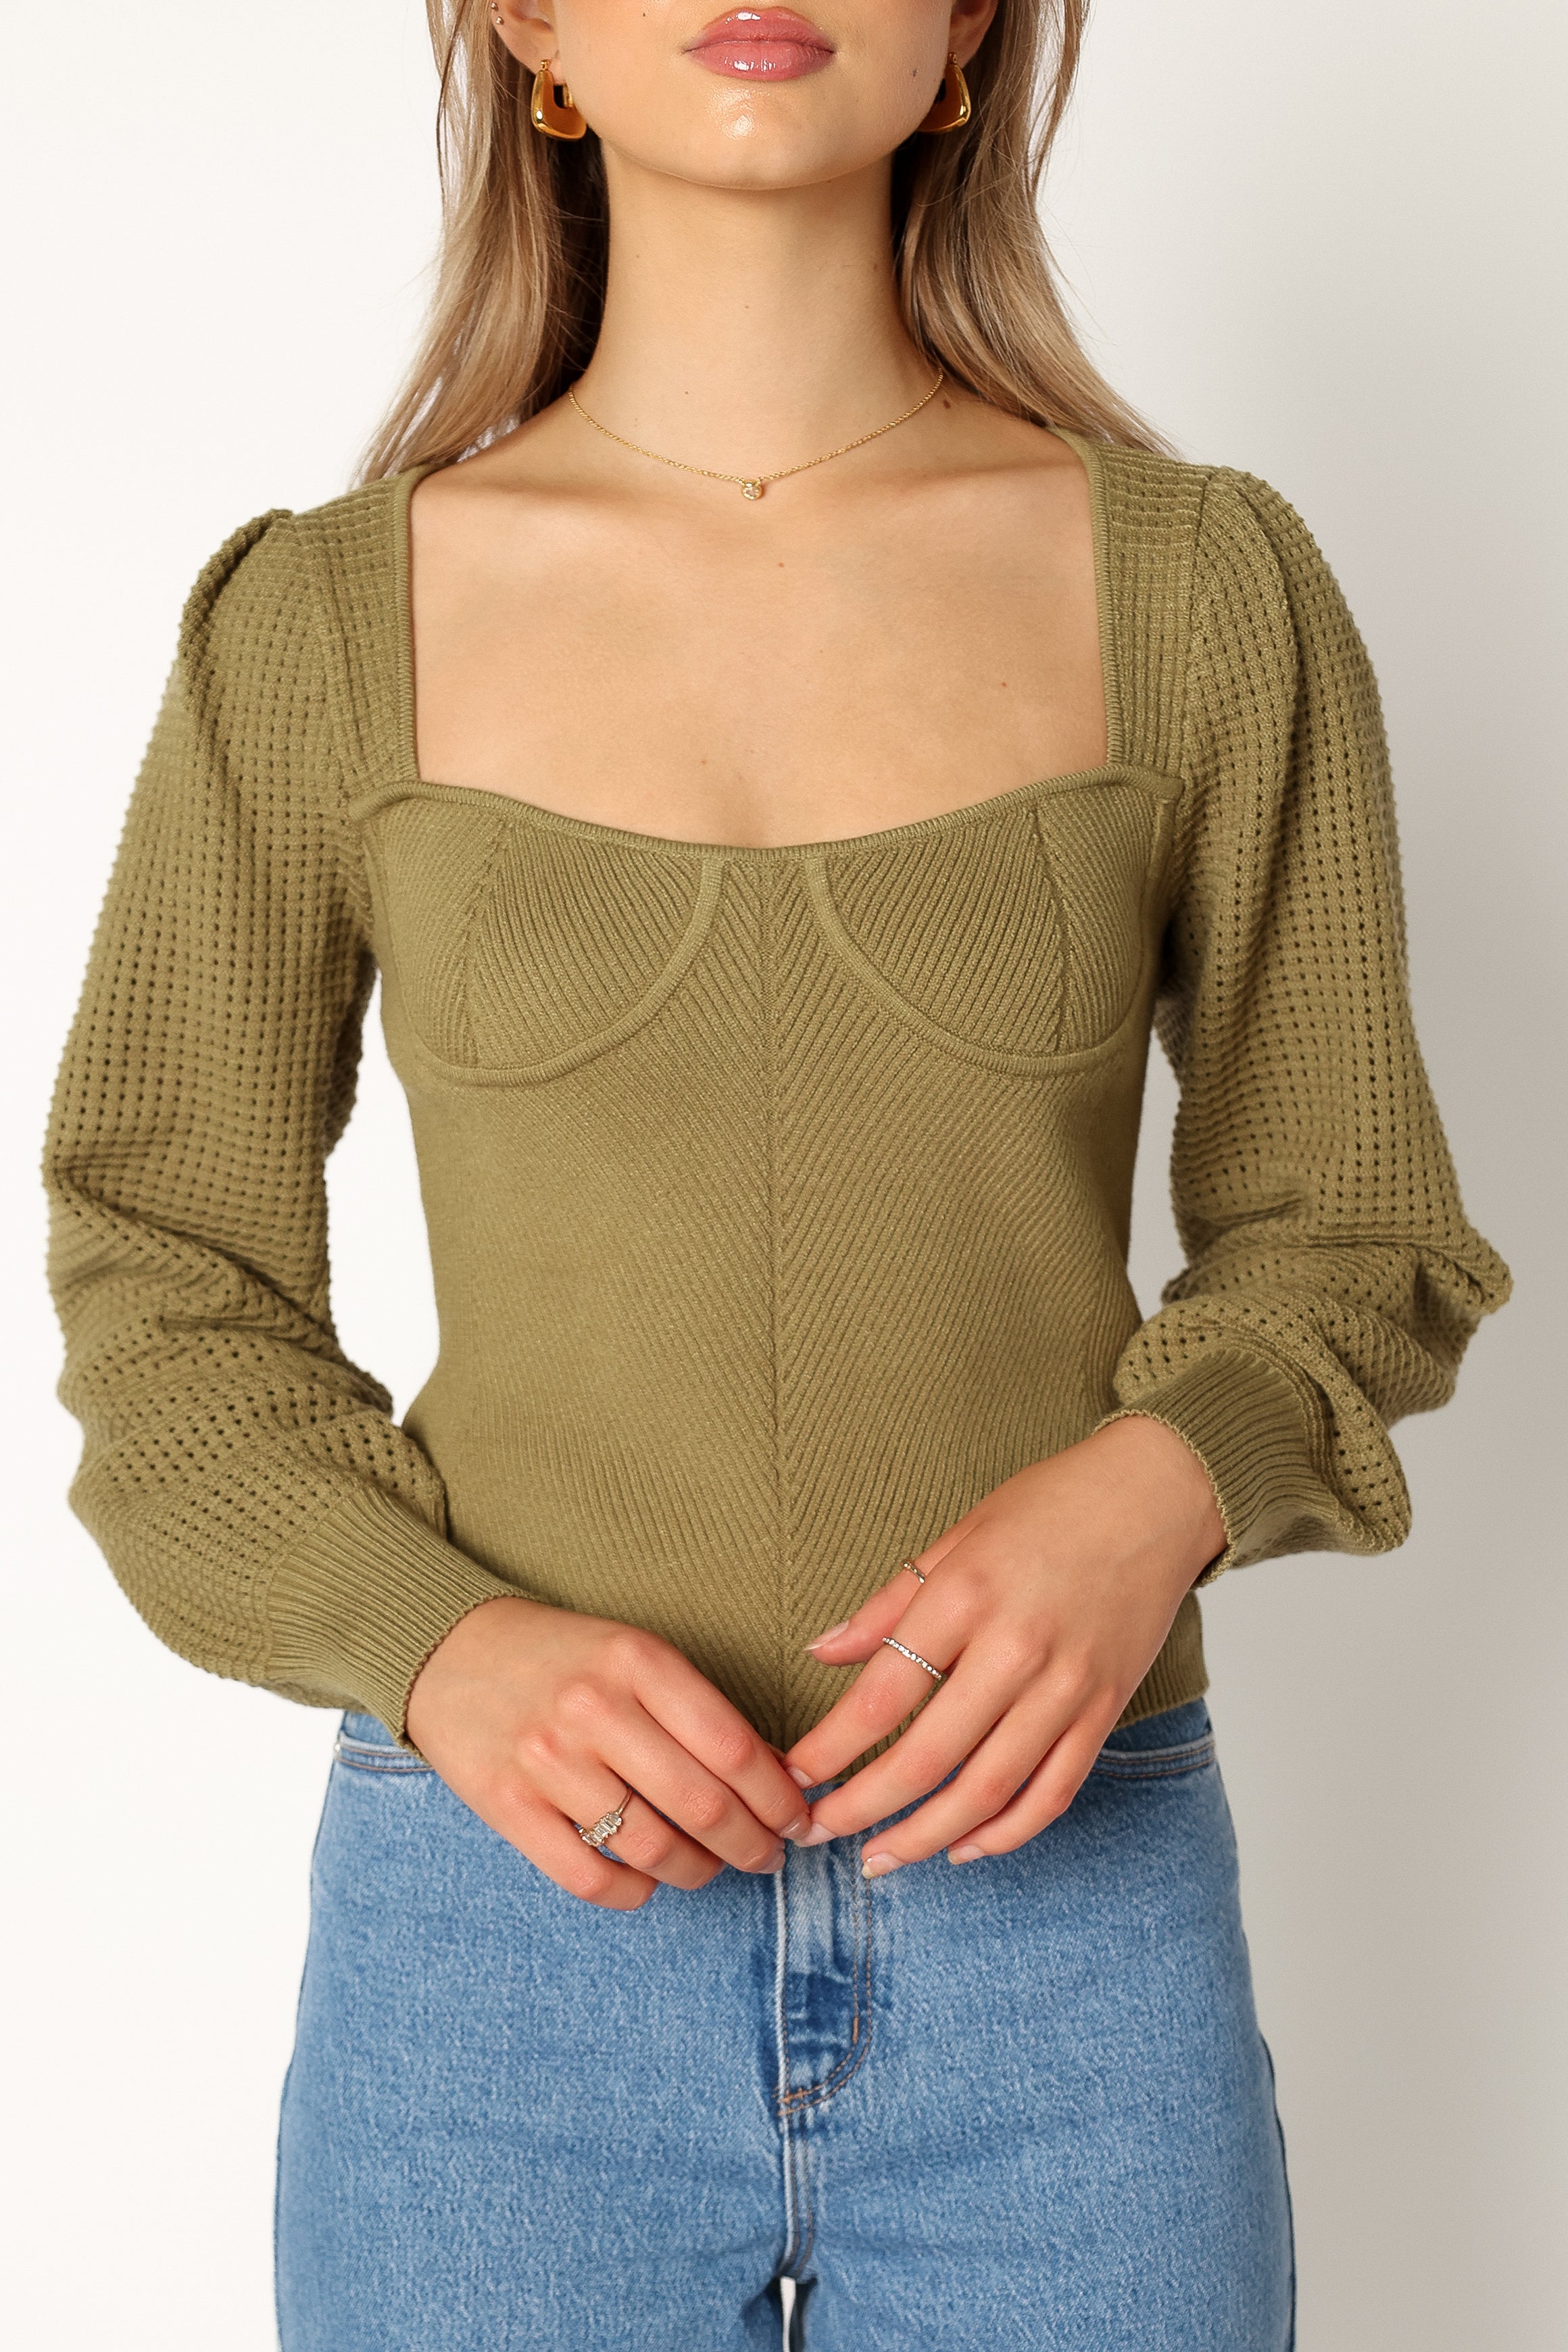 Madalyn Knit Sweater - Olive